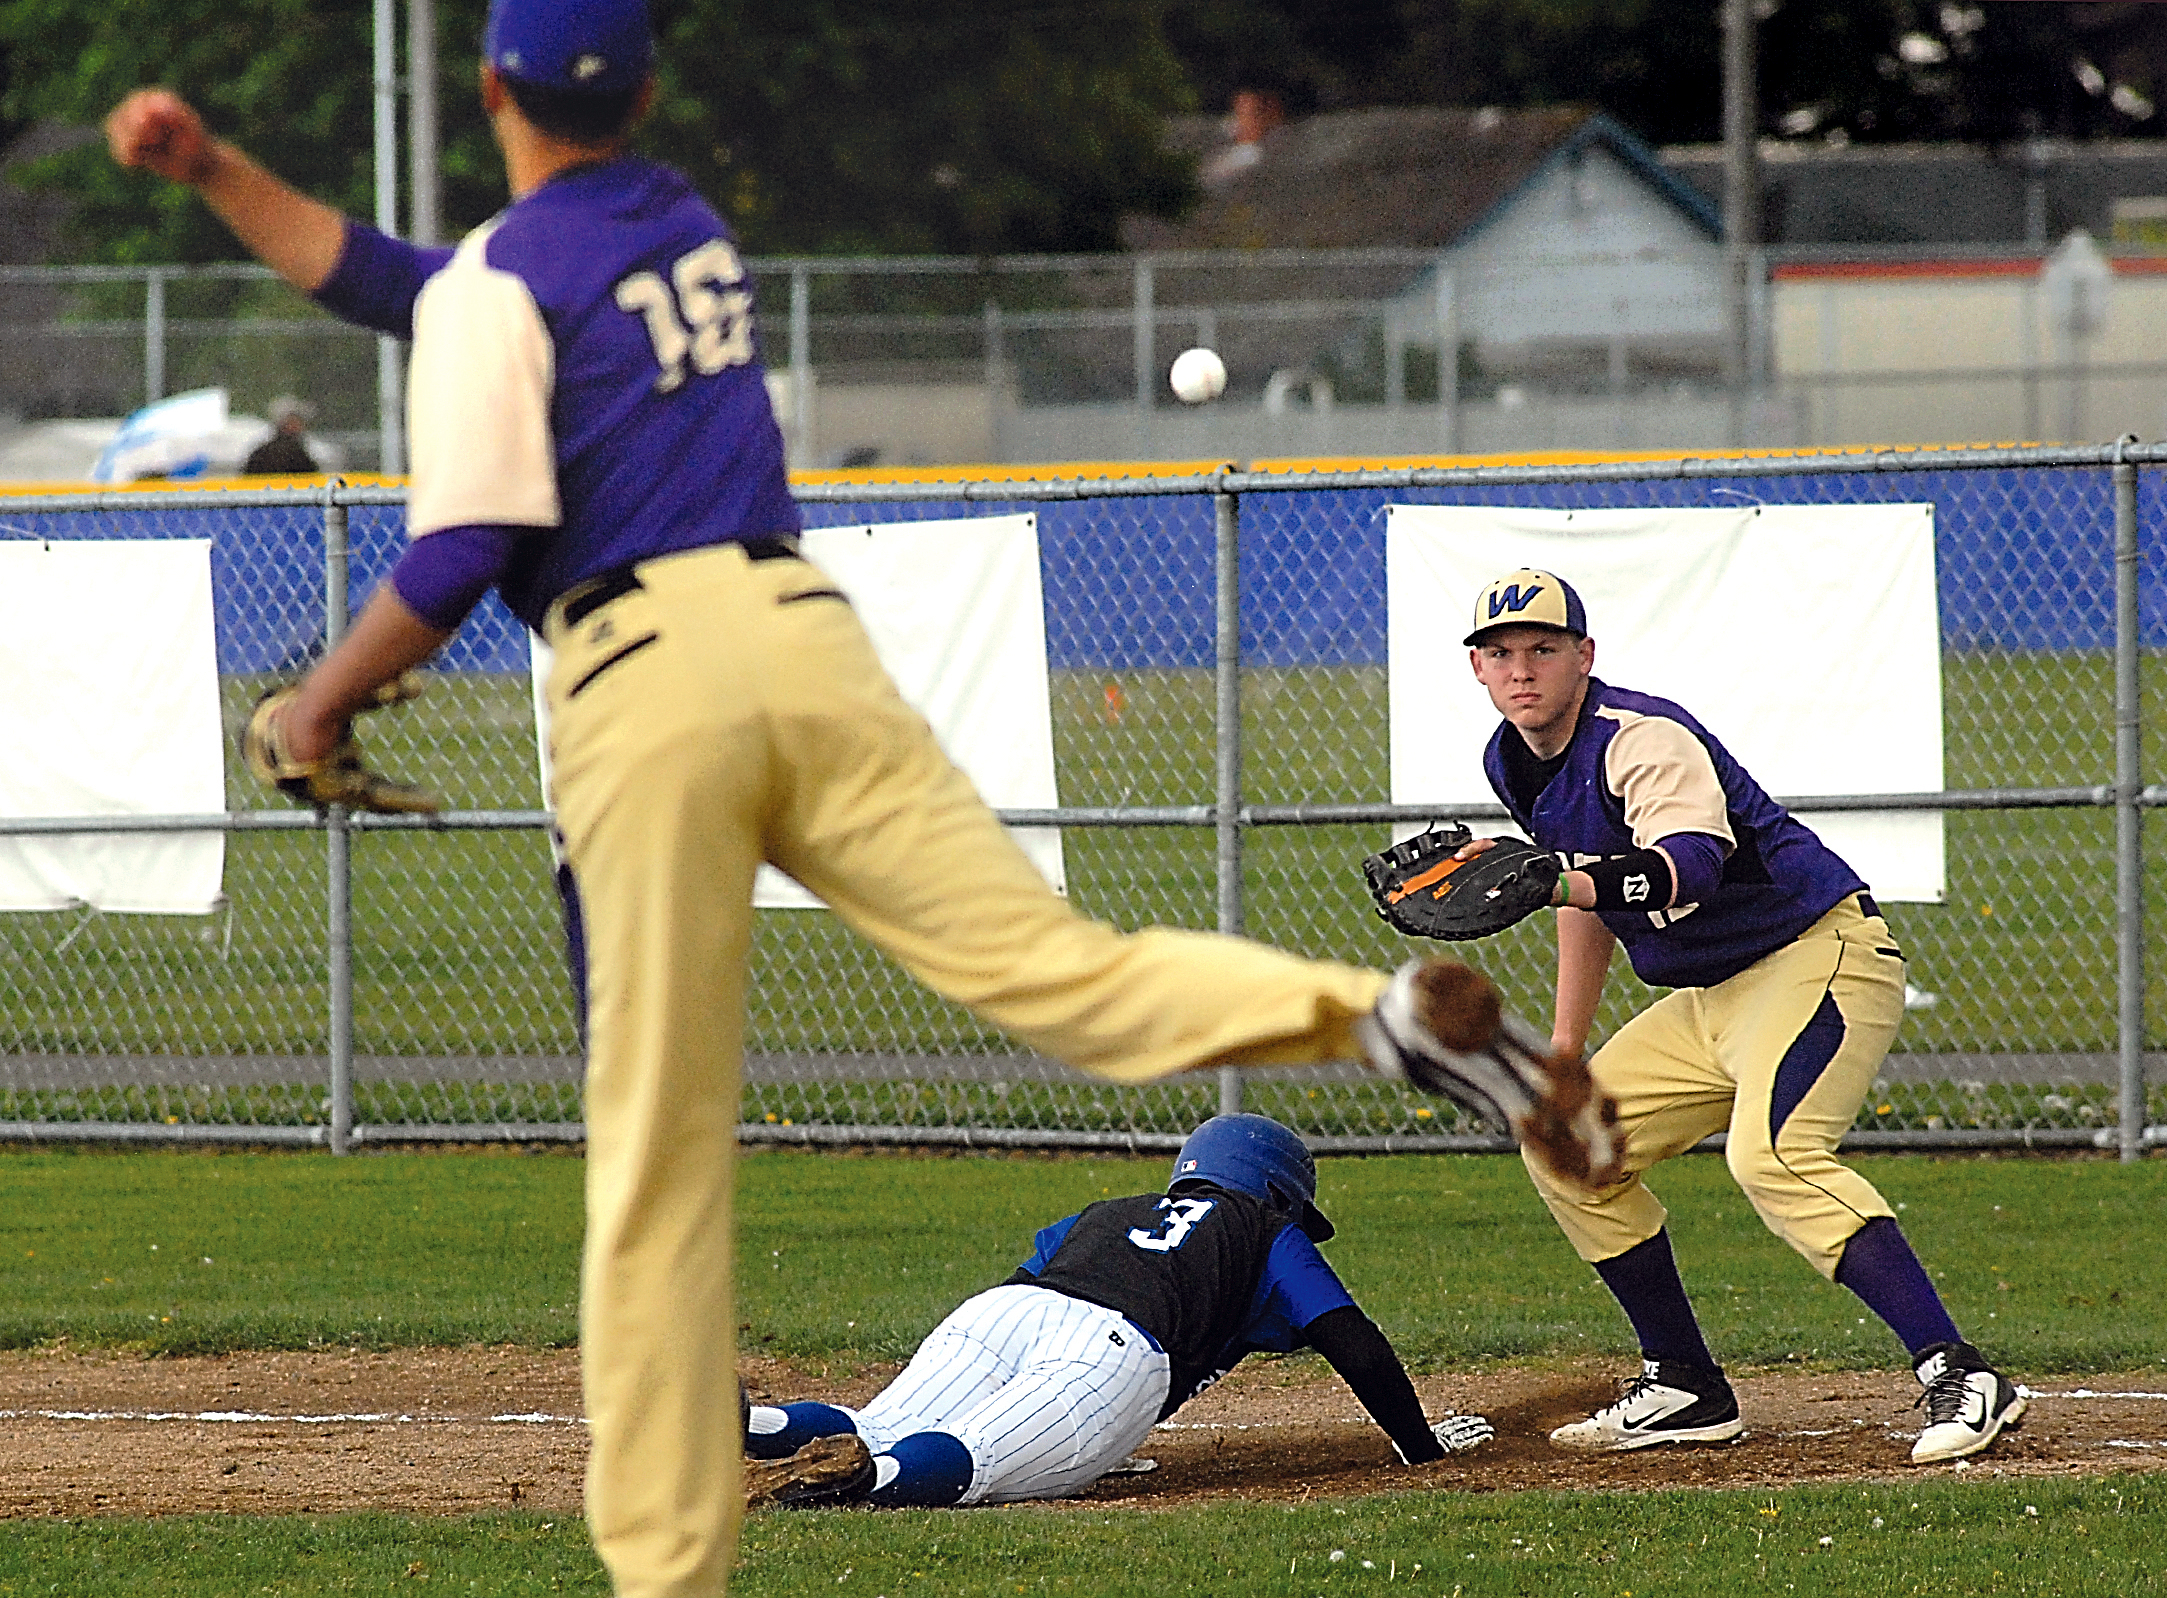 Sequim pitcher Nigel Christian (16) throws to first baseman Daniel Harker in an attempt to pick off North Mason's D'Ante Long. (Keith Thorpe/Peninsula Daily News)